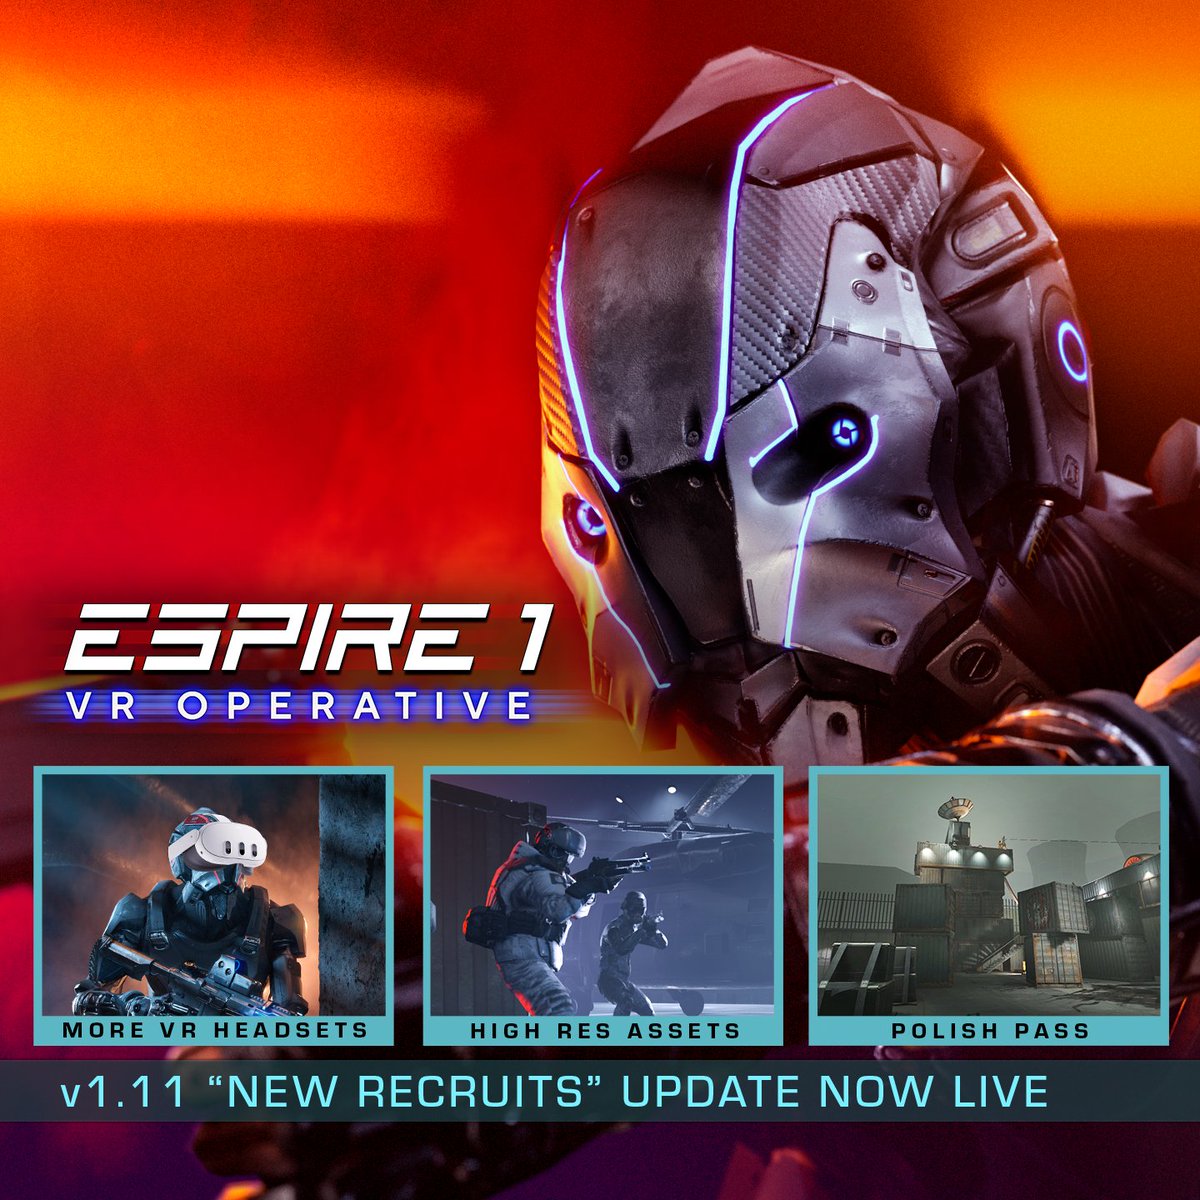 To our #PCVR players: we've recently shipped a major #Espire1 v1.11 update to #SteamVR, including support for more VR headsets, higher-res assets & a polish pass across the entire game. + there's more in store for Espire 1 in the coming months.